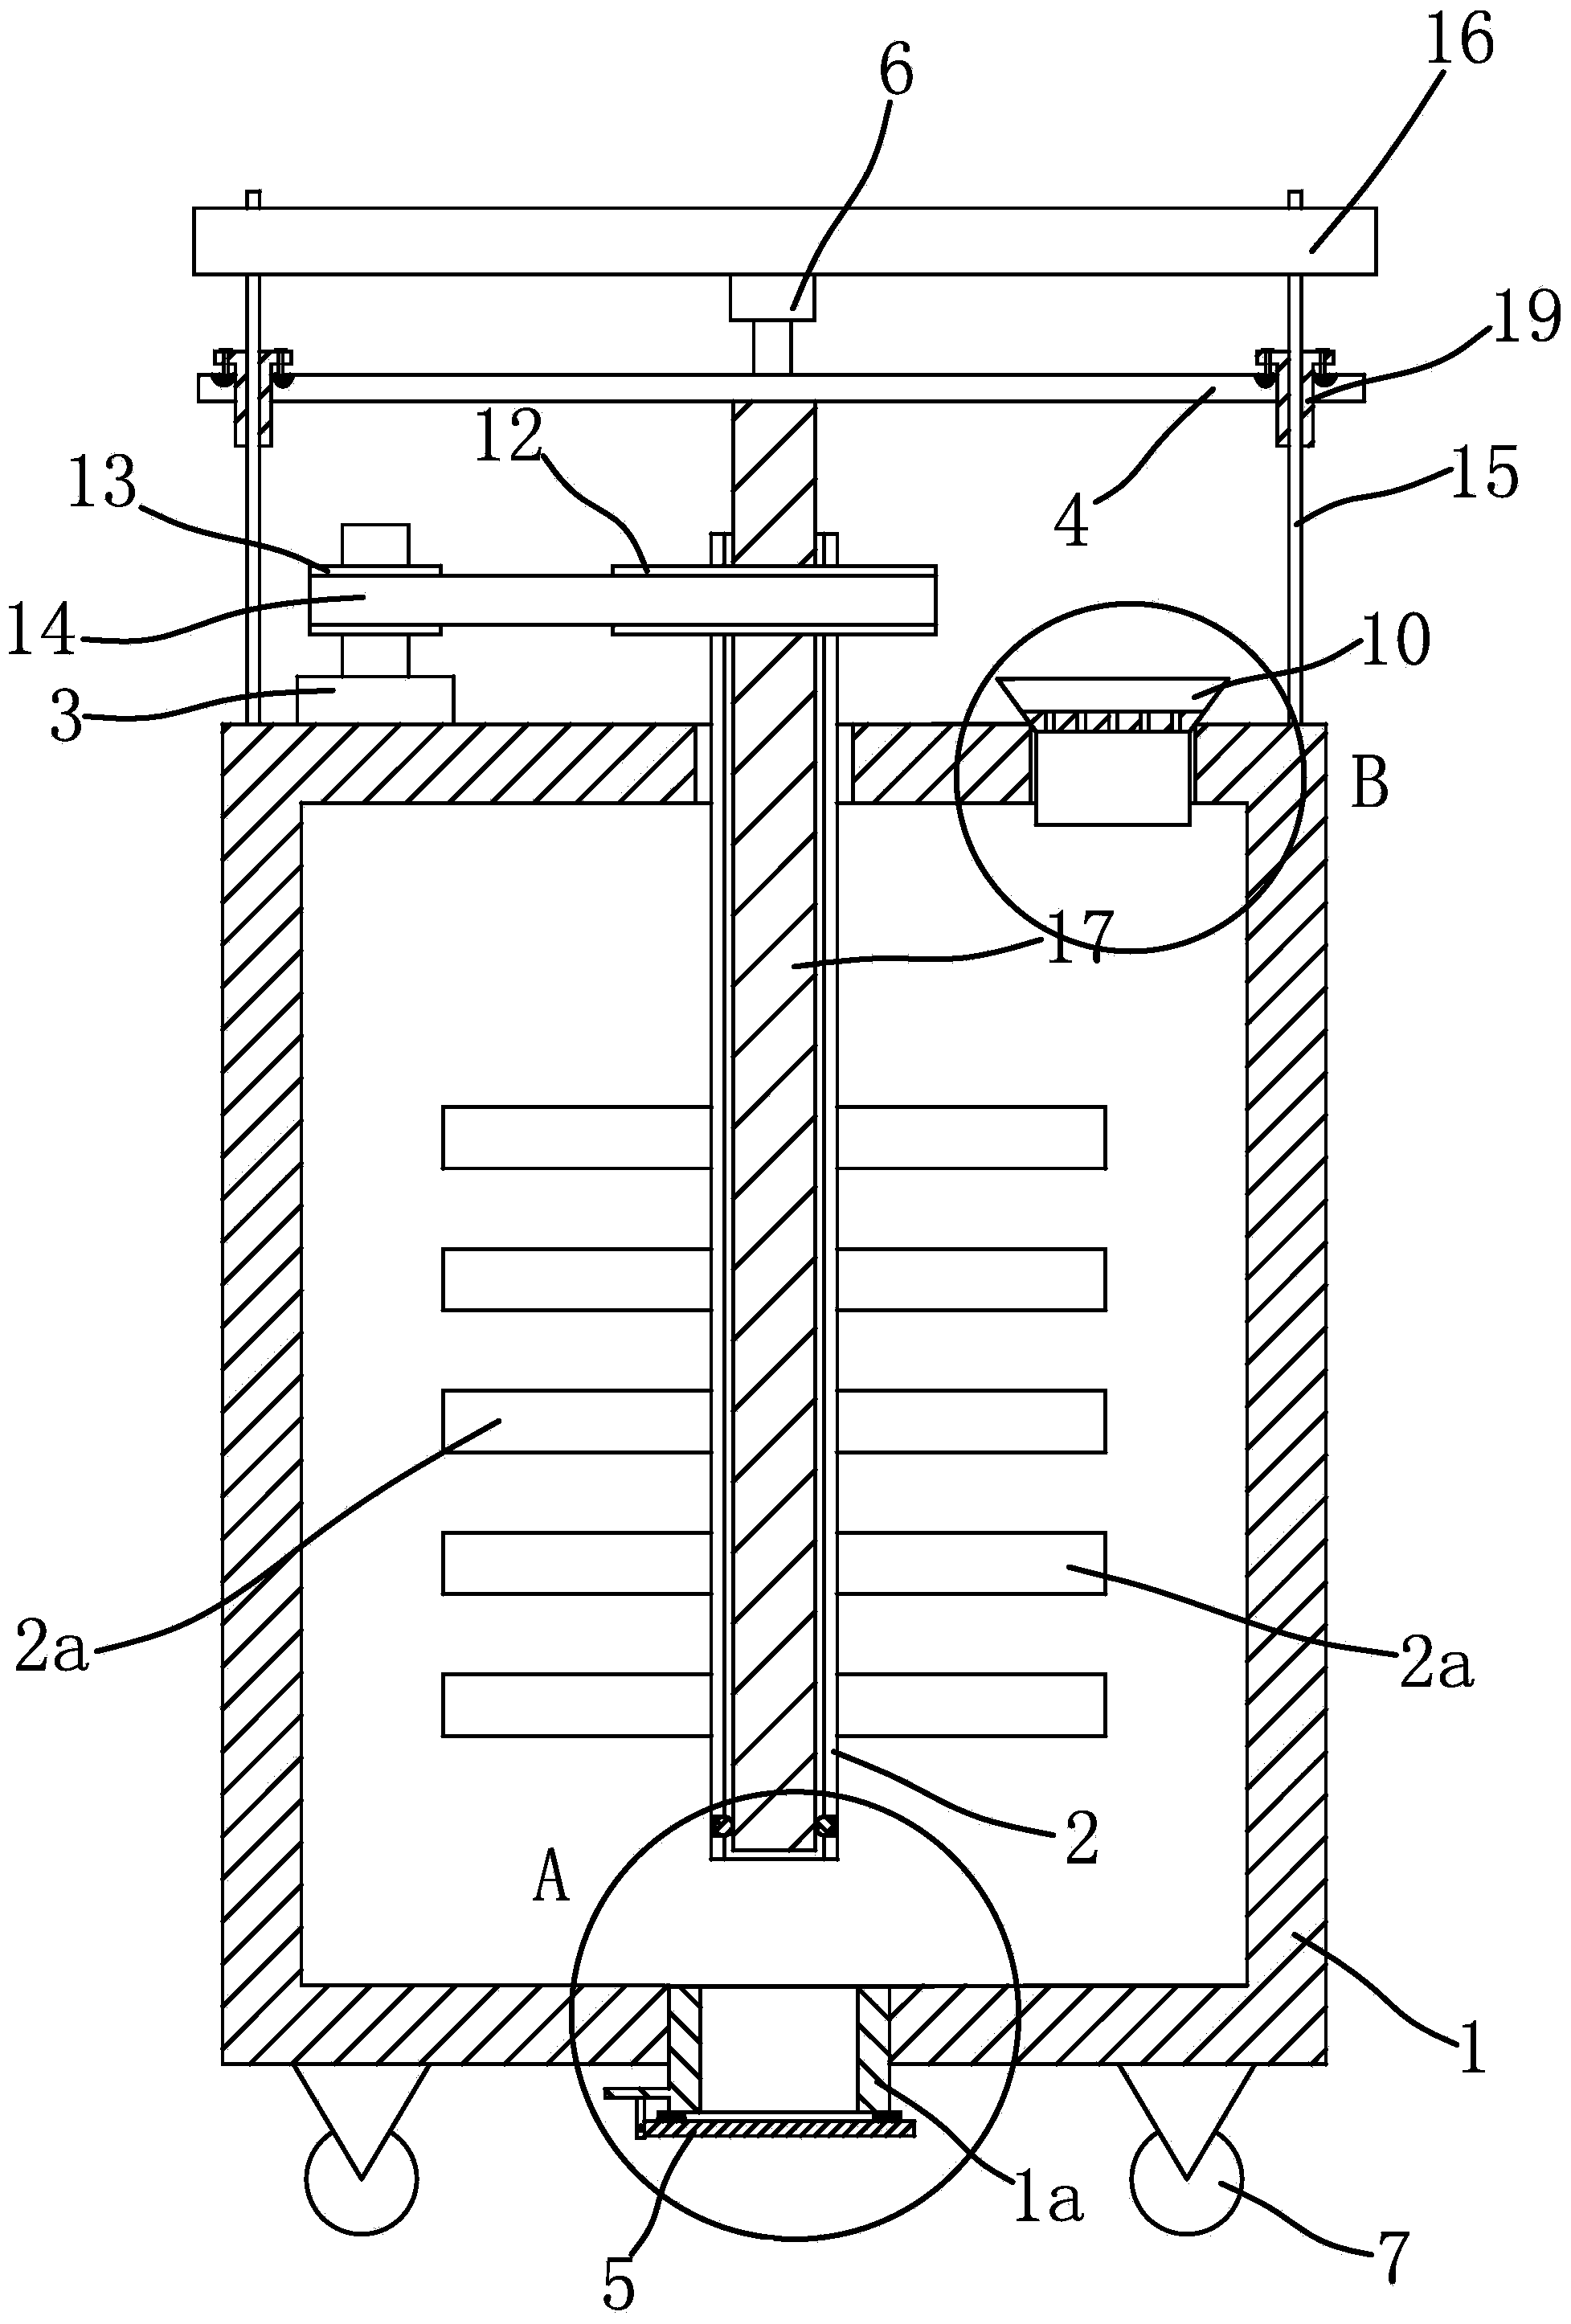 Stirring device applicable to liquid medicine and chemical feed liquid